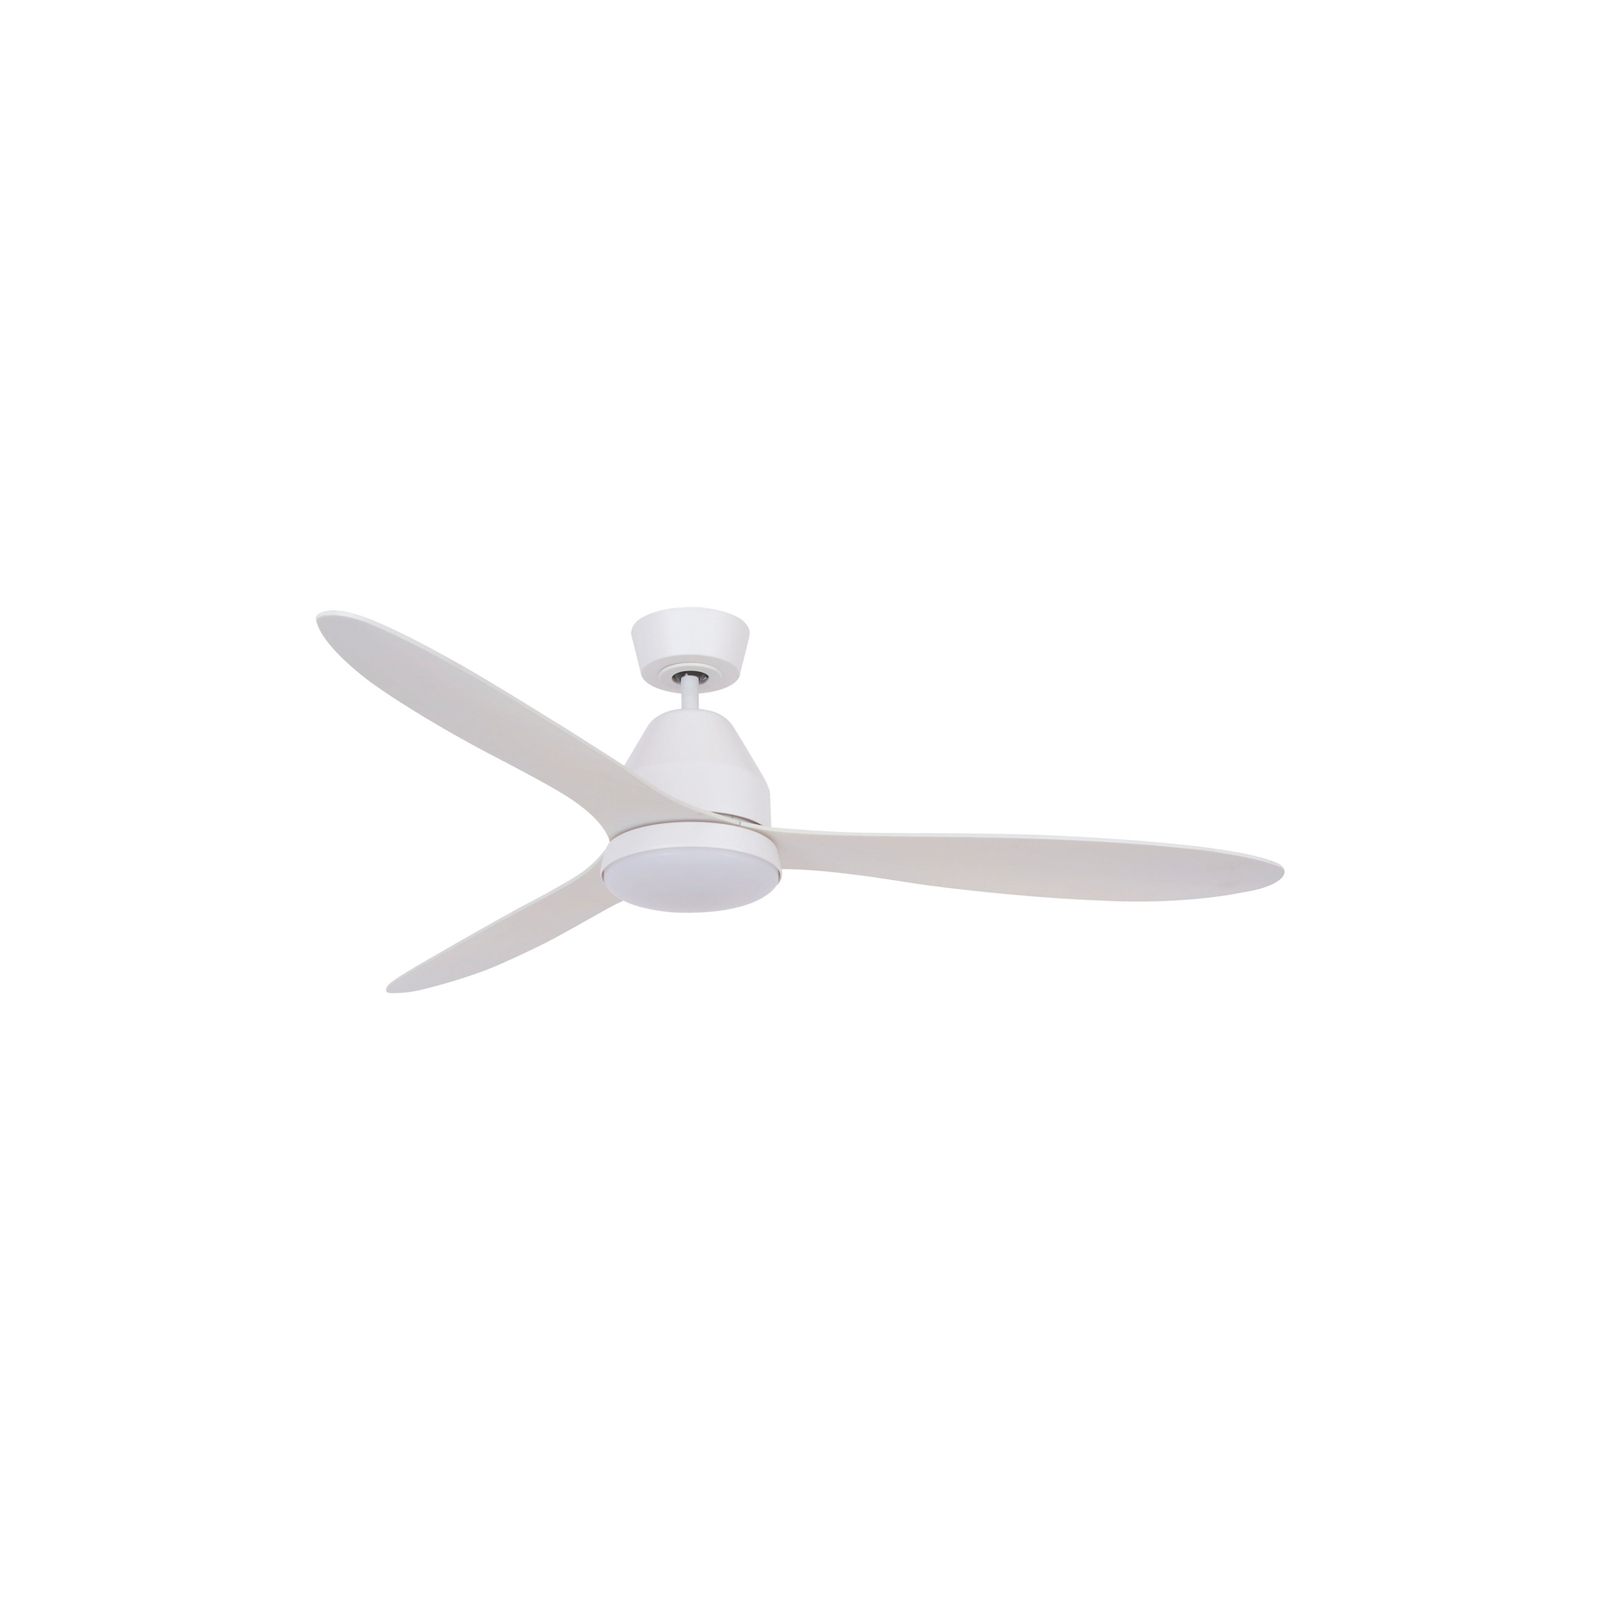 Beacon ceiling fan with light Whitehaven white quiet